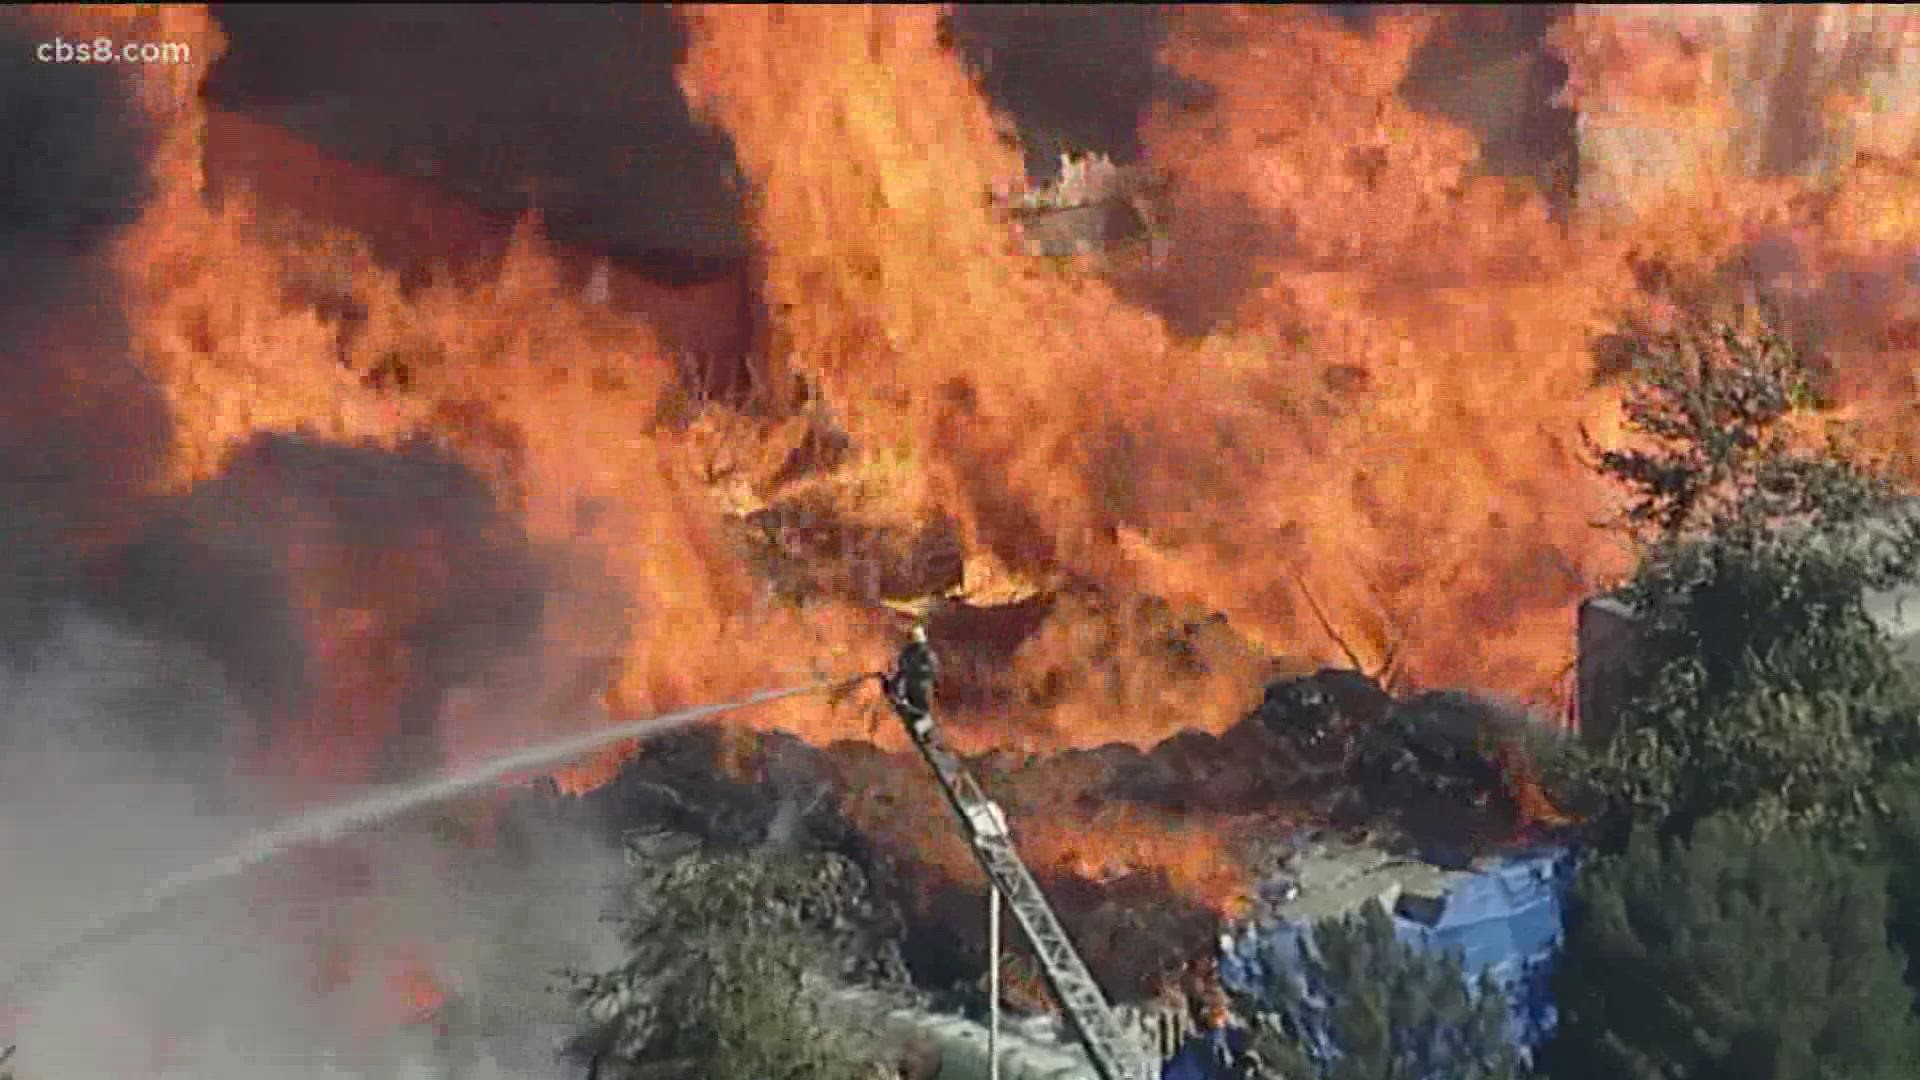 Businesses near the fire have been evacuated, according to the Los Angeles County Sheriff's Department.